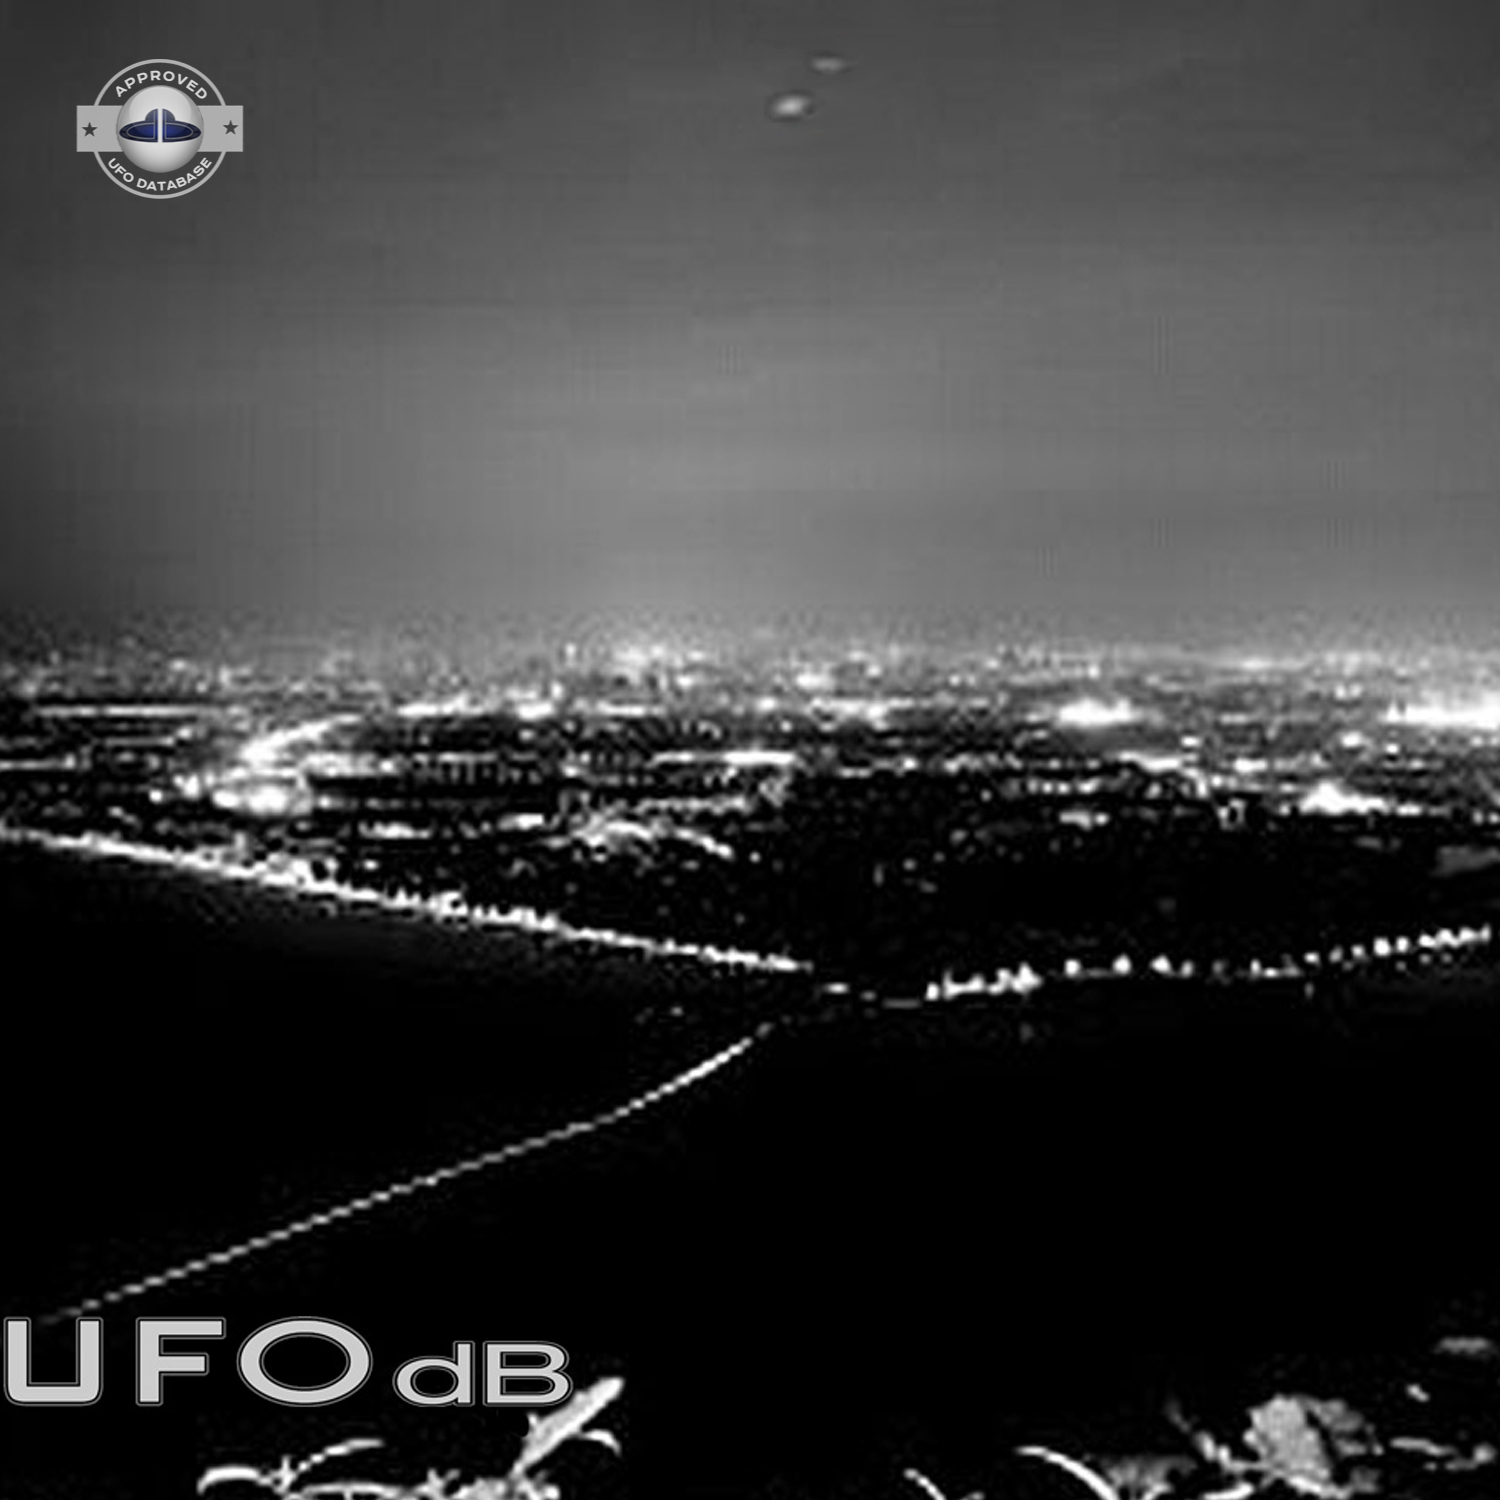 China UFO Sighting | Kunming, Yunnan UFO picture | October 14 2010 UFO Picture #151-2